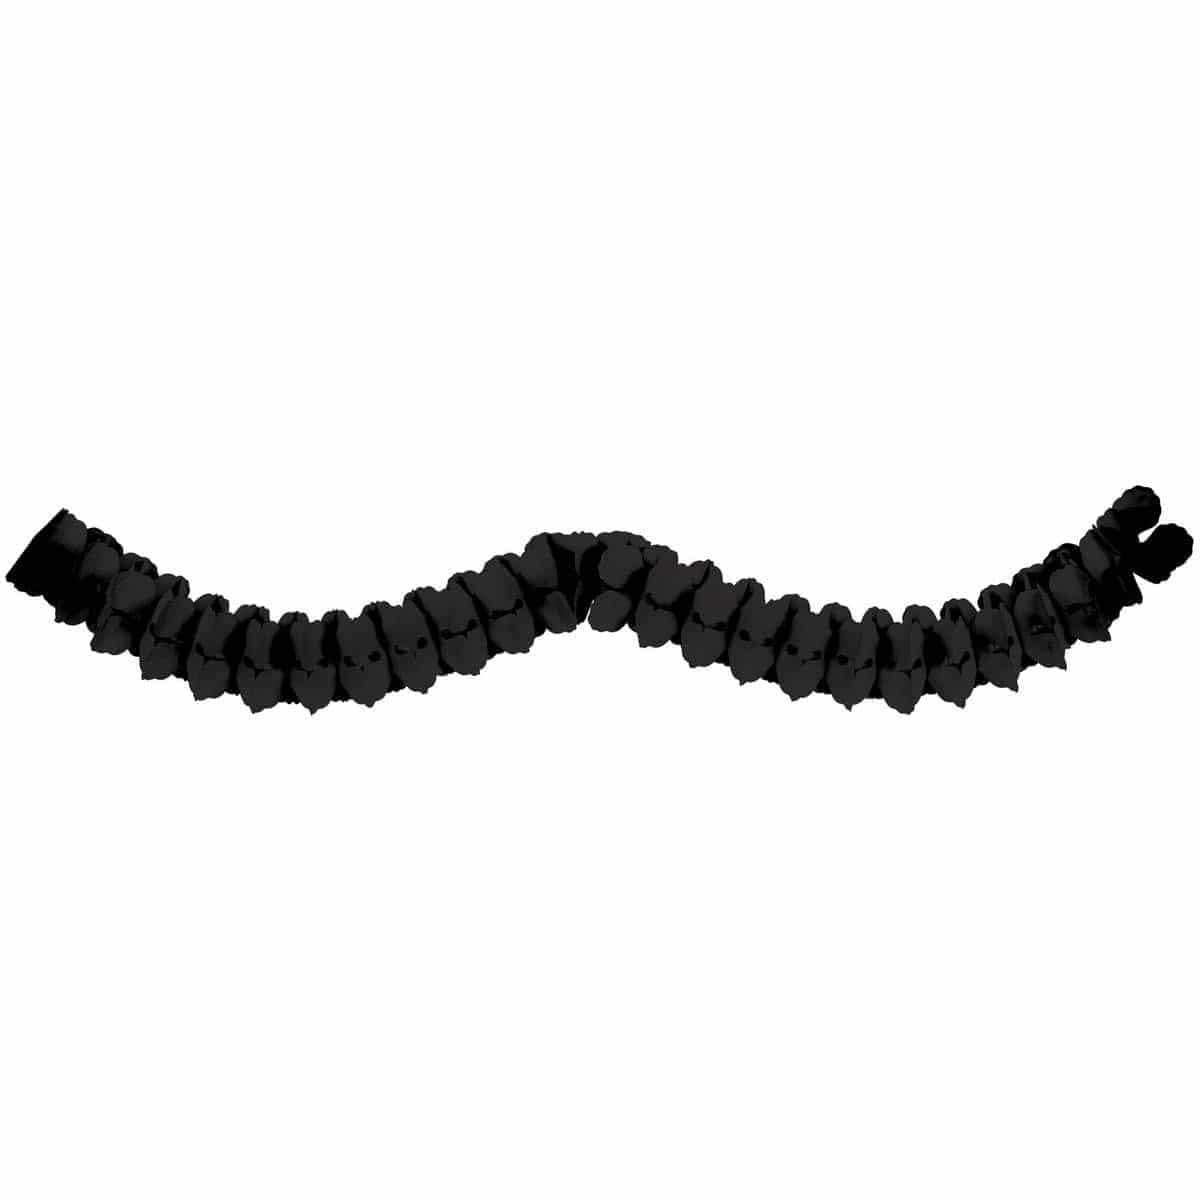 Buy Decorations Paper Garlands - Jet Black 12 Ft sold at Party Expert